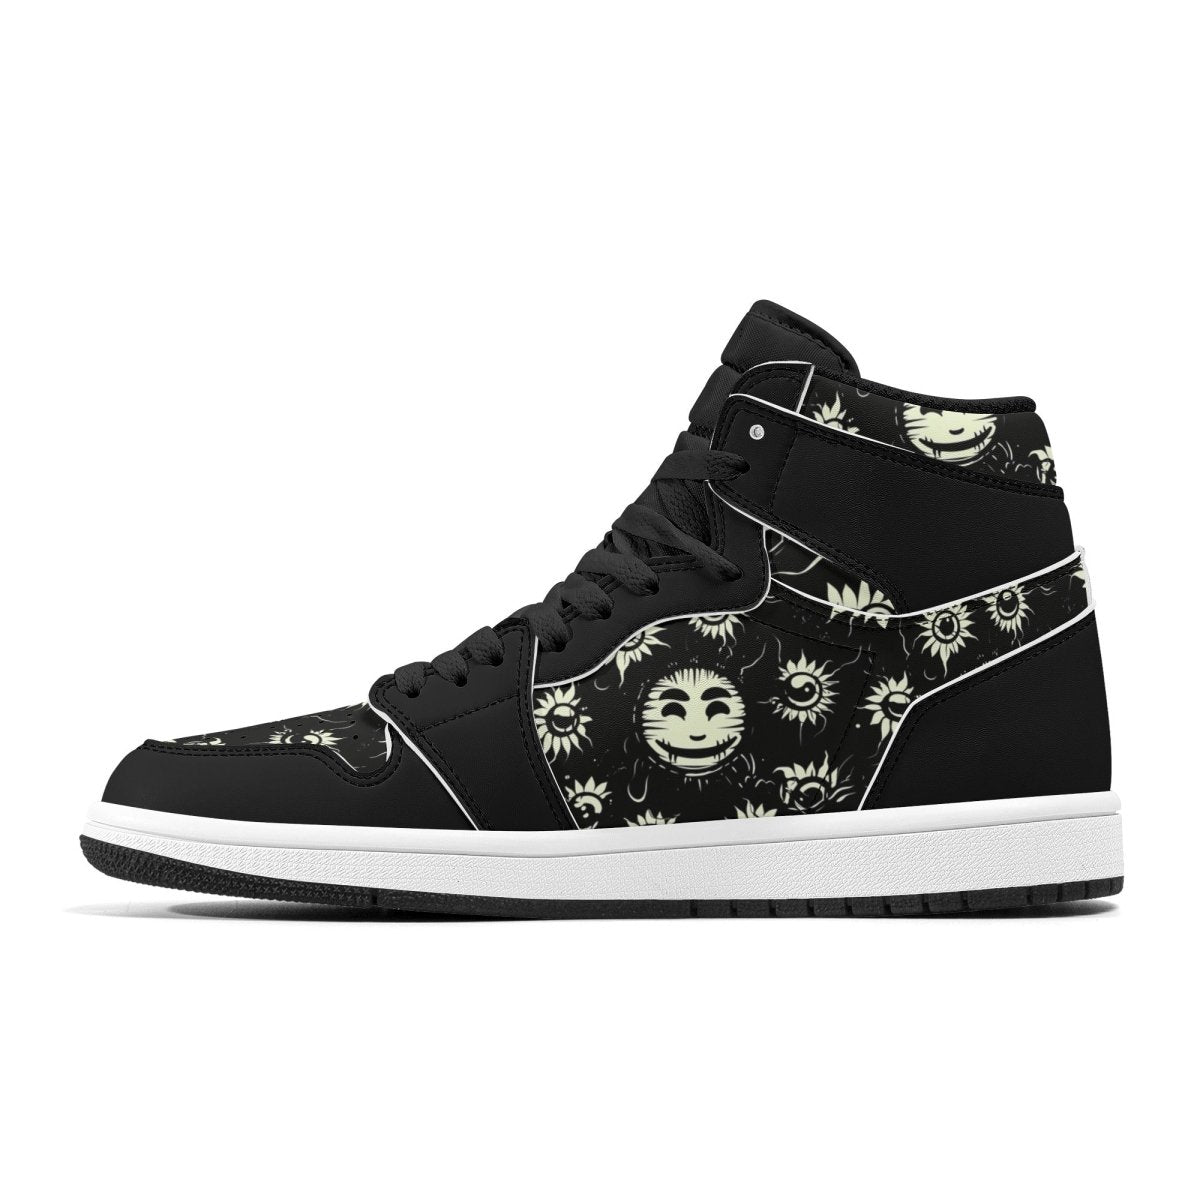 Mens High Leather Smiley High - Mainly High